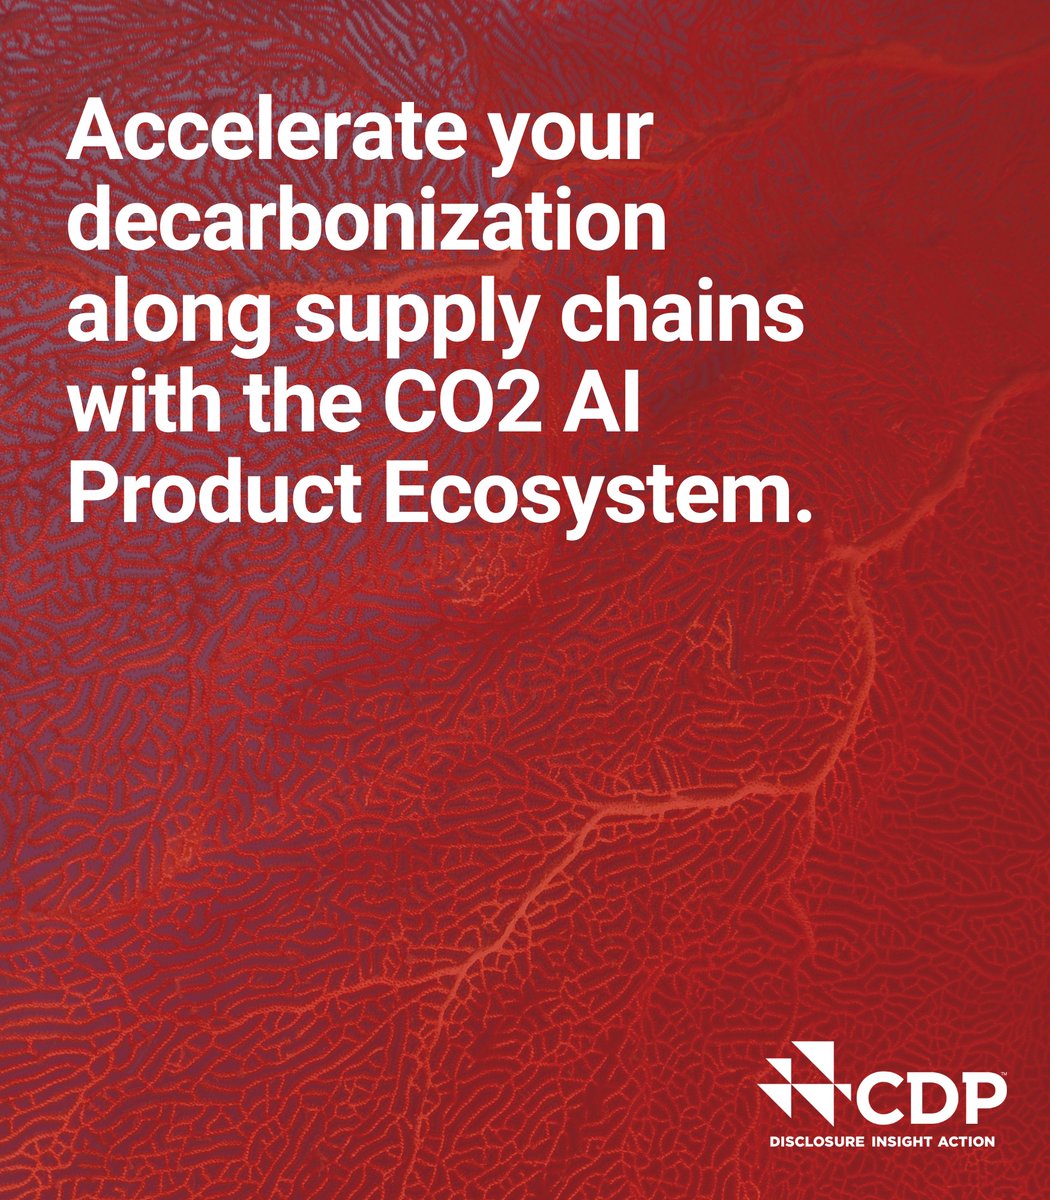 📣 CDP has partnered with CO2 AI to create the CO2 AI Product Ecosystem, a transformative solution, leveraging advanced analytics and technology to empower companies to measure and manage emissions down to the product level. Discover more: ow.ly/He6Q50QFHLN